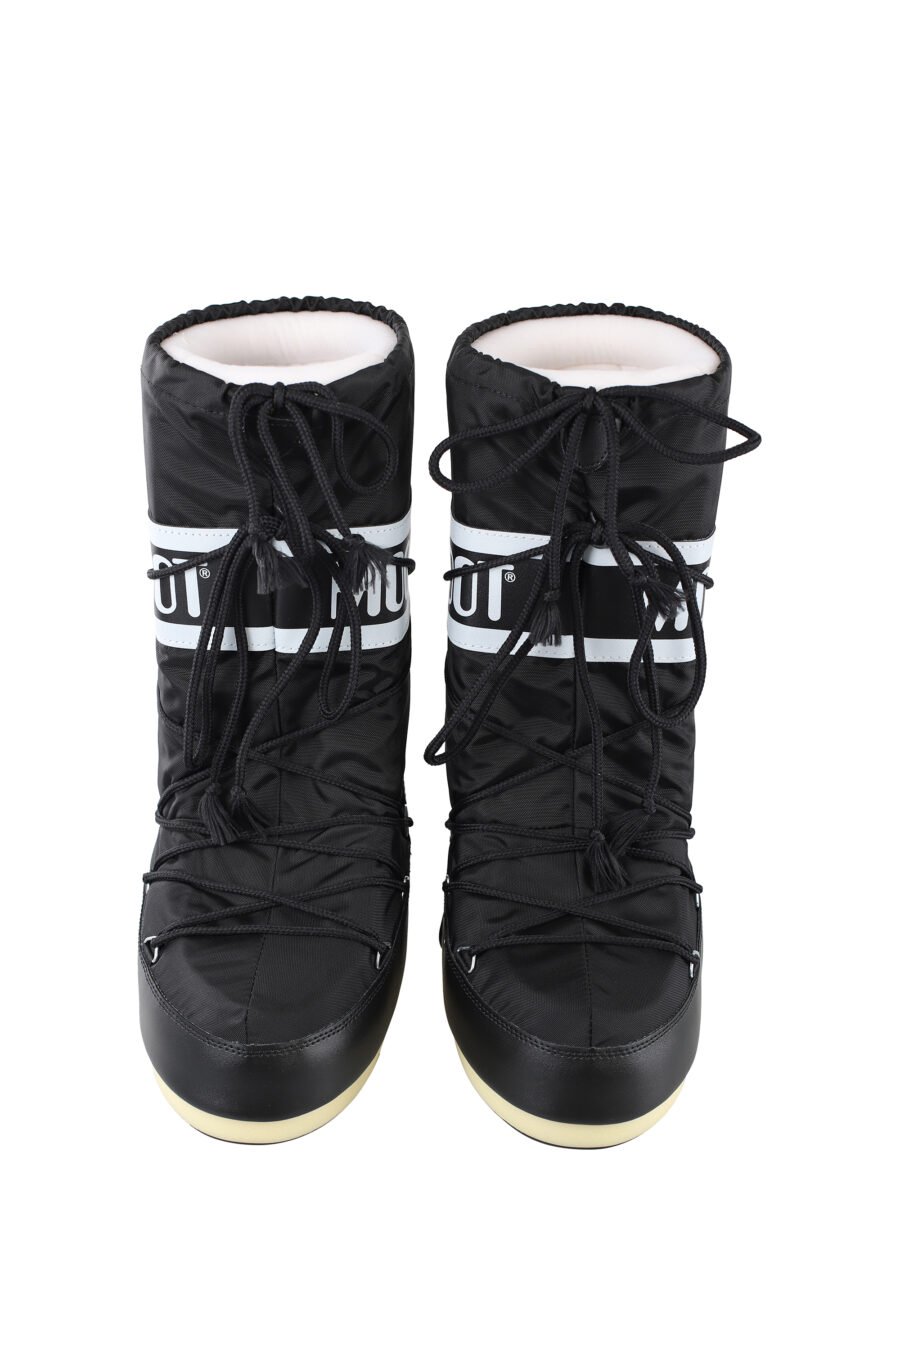 Black snow boots with white logo on ribbon - IMG 6708